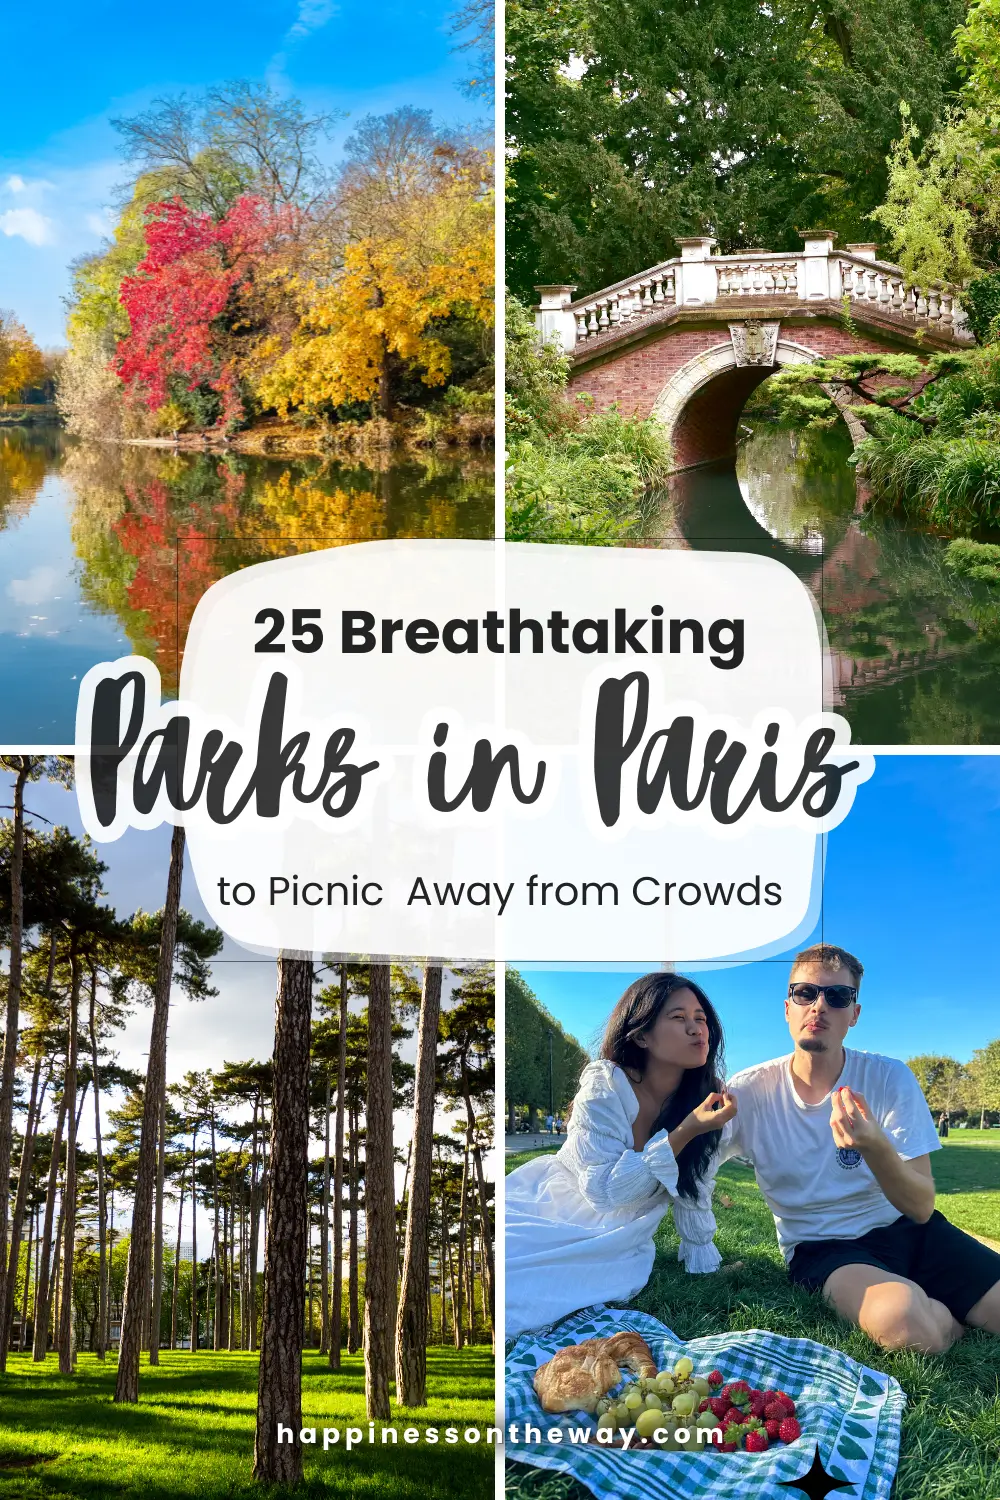 a blog post featuring 25 Best Parks in Paris, with a collage of park scenes: autumn foliage reflected in water, a serene bridge over a park stream, tall pines, and a couple picnicking with the Eiffel Tower in the background. 